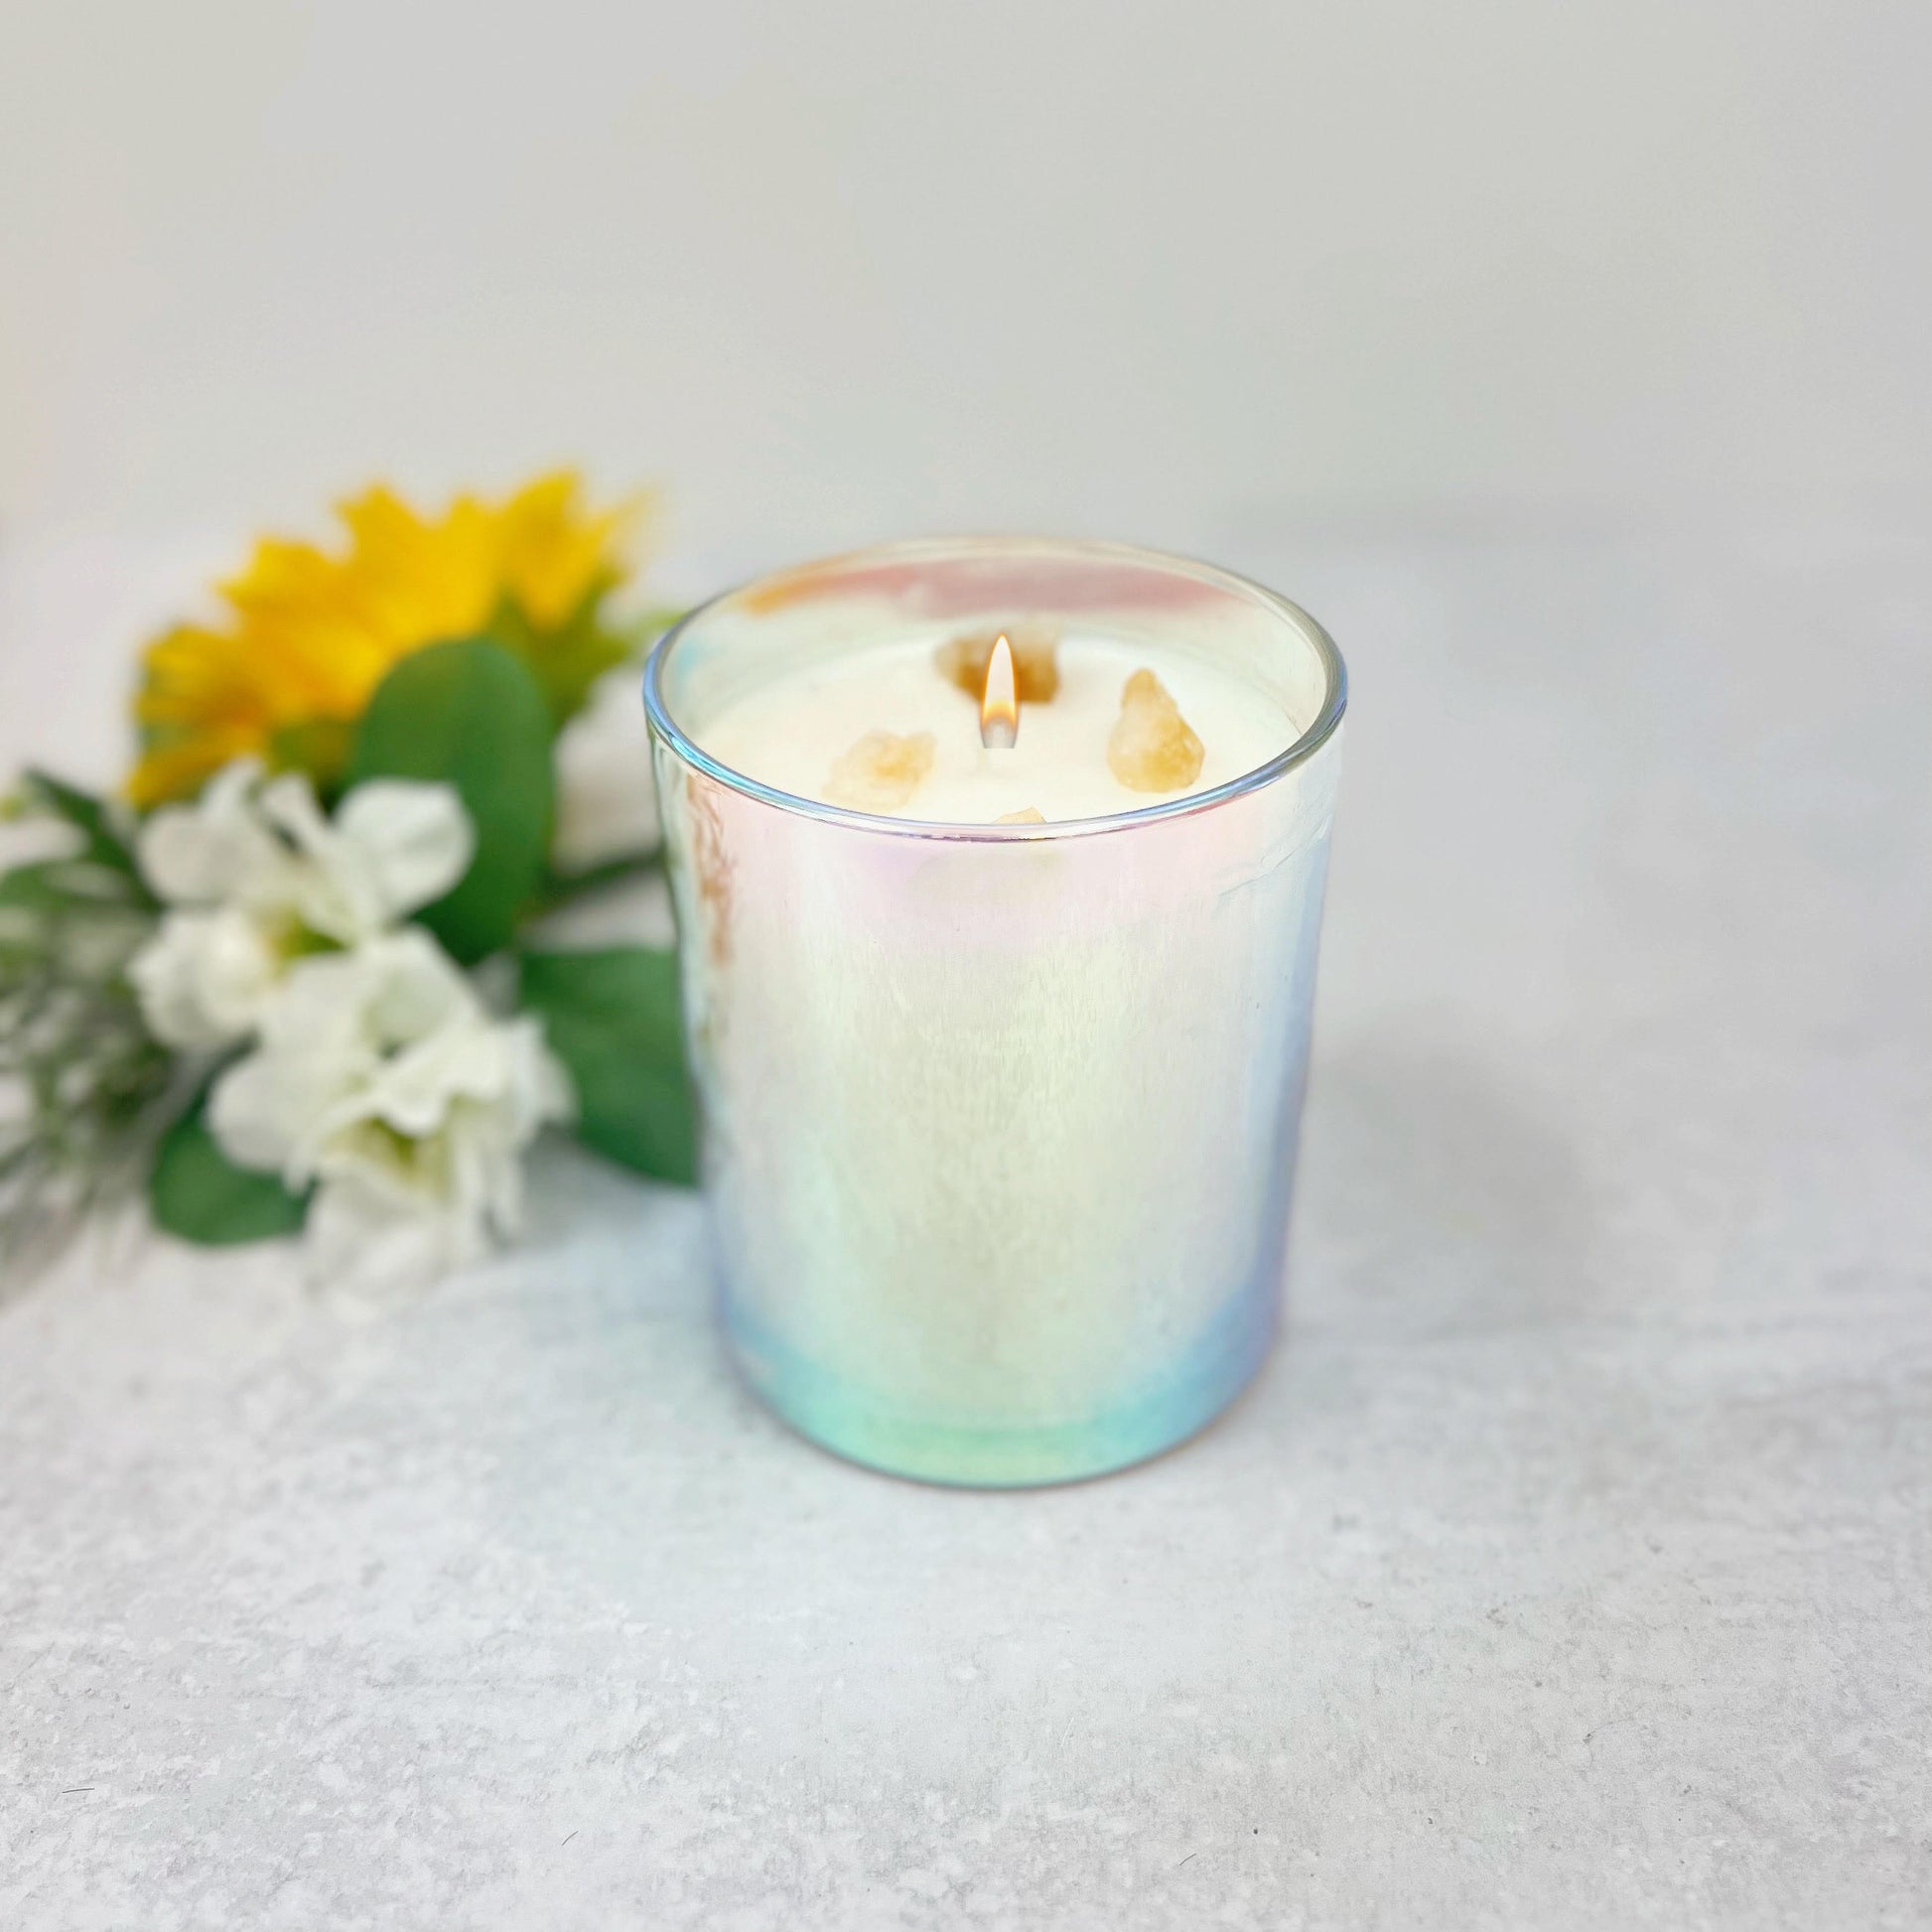 Oil Scents For Candle Making Scented Candle In Glass Jar Wholesale Custom  Scented Candles - Buy Oil Scents For Candle Making Scented Candle In Glass  Jar Wholesale Custom Scented Candles Product on